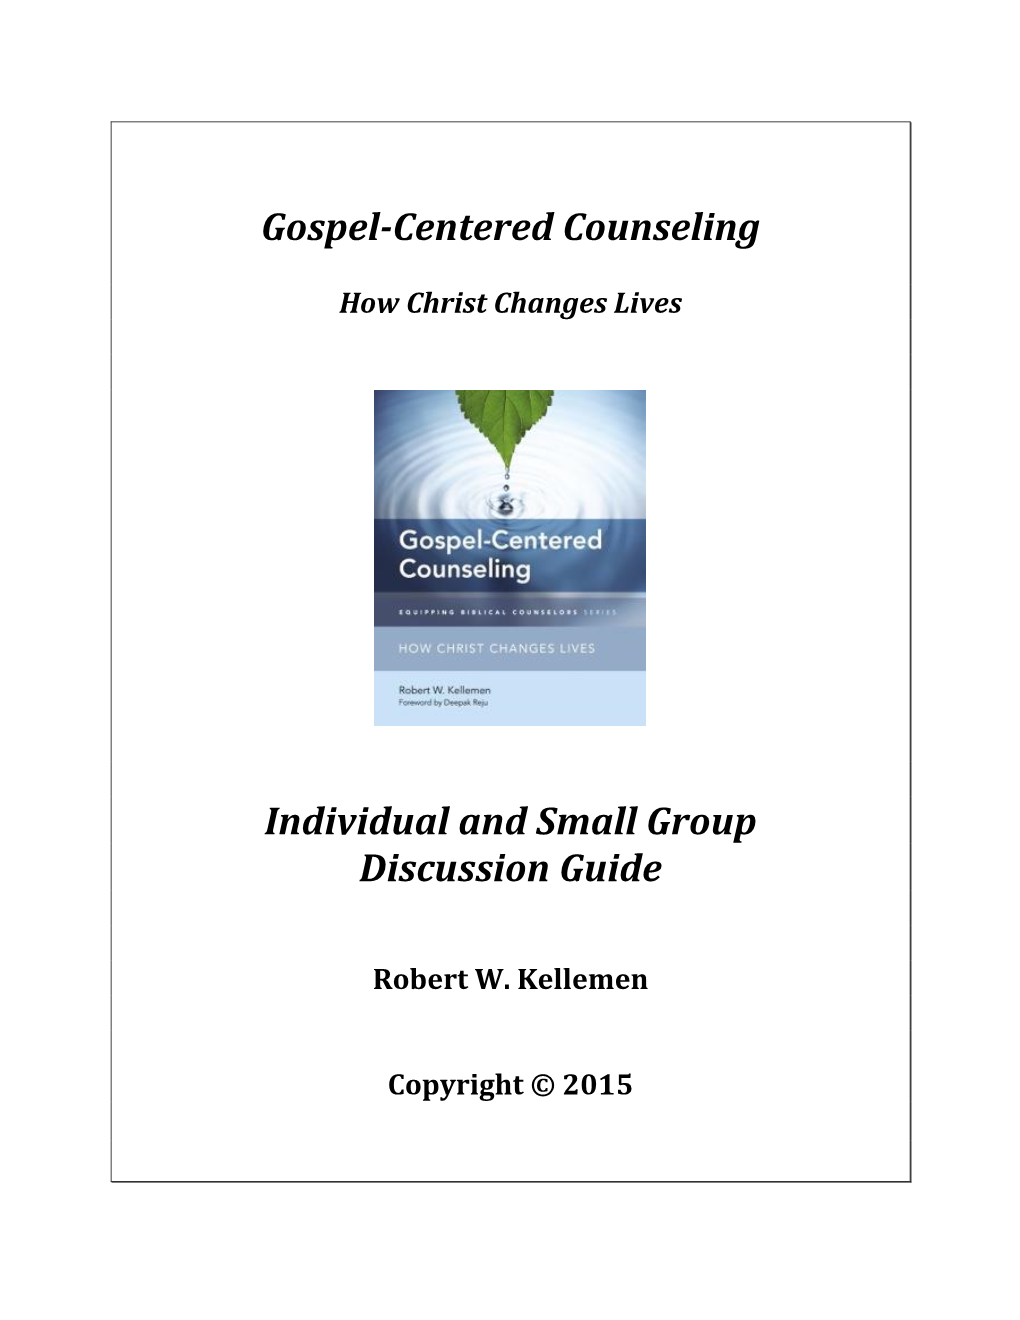 Gospel-Centered Counseling Individual and Small Group Discussion Guide